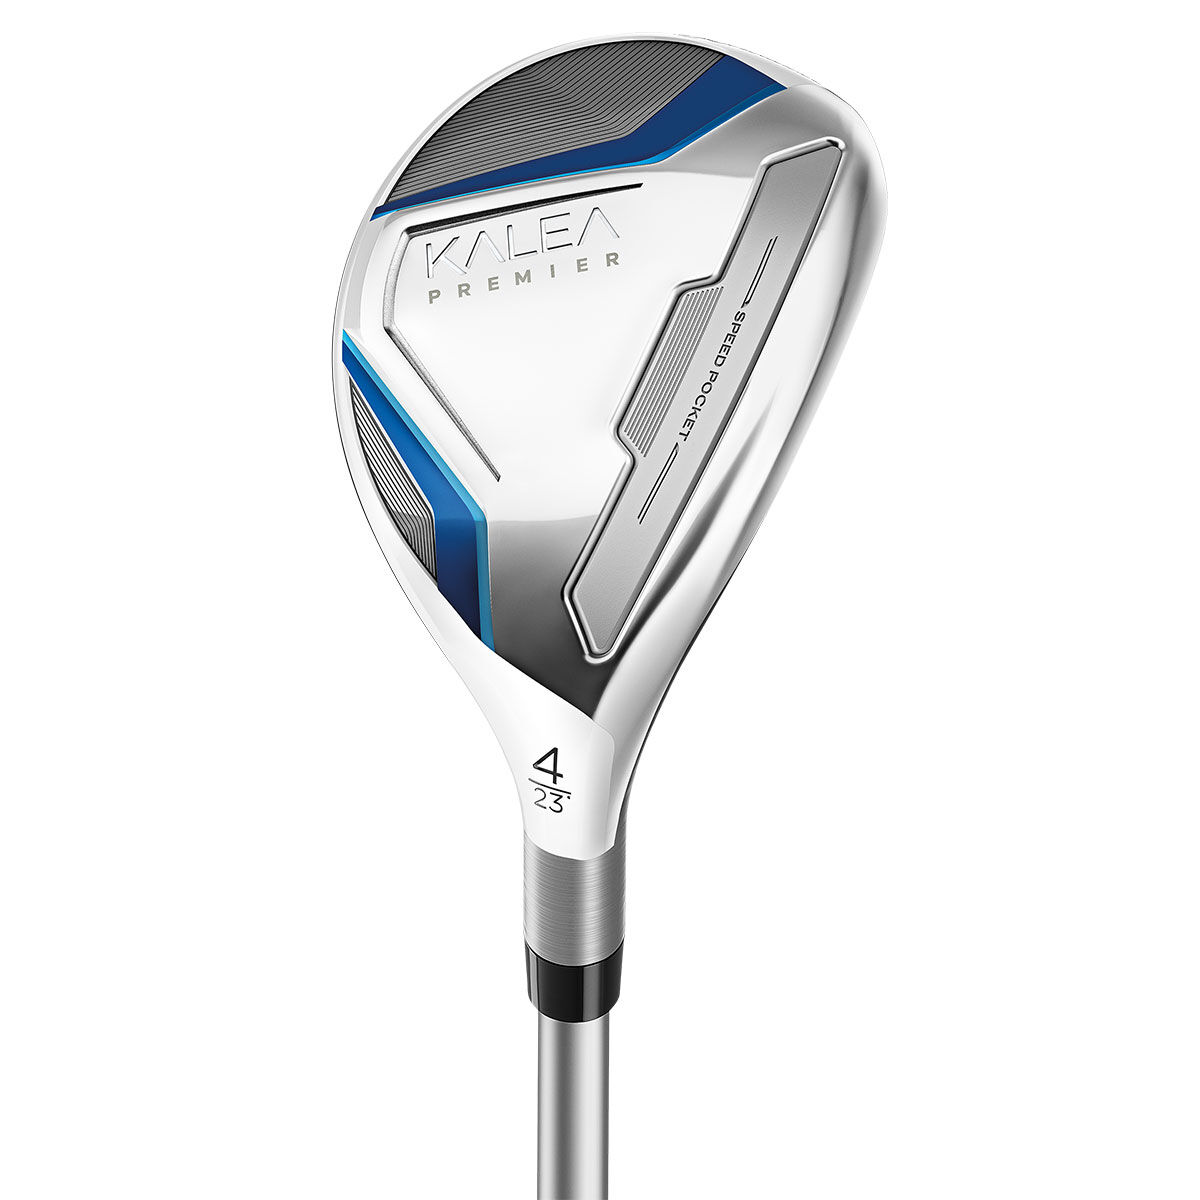 TaylorMade Silver and Blue Women's Kalea Premier Custom Fit Golf Hybrid | American Golf, One Size von TaylorMade